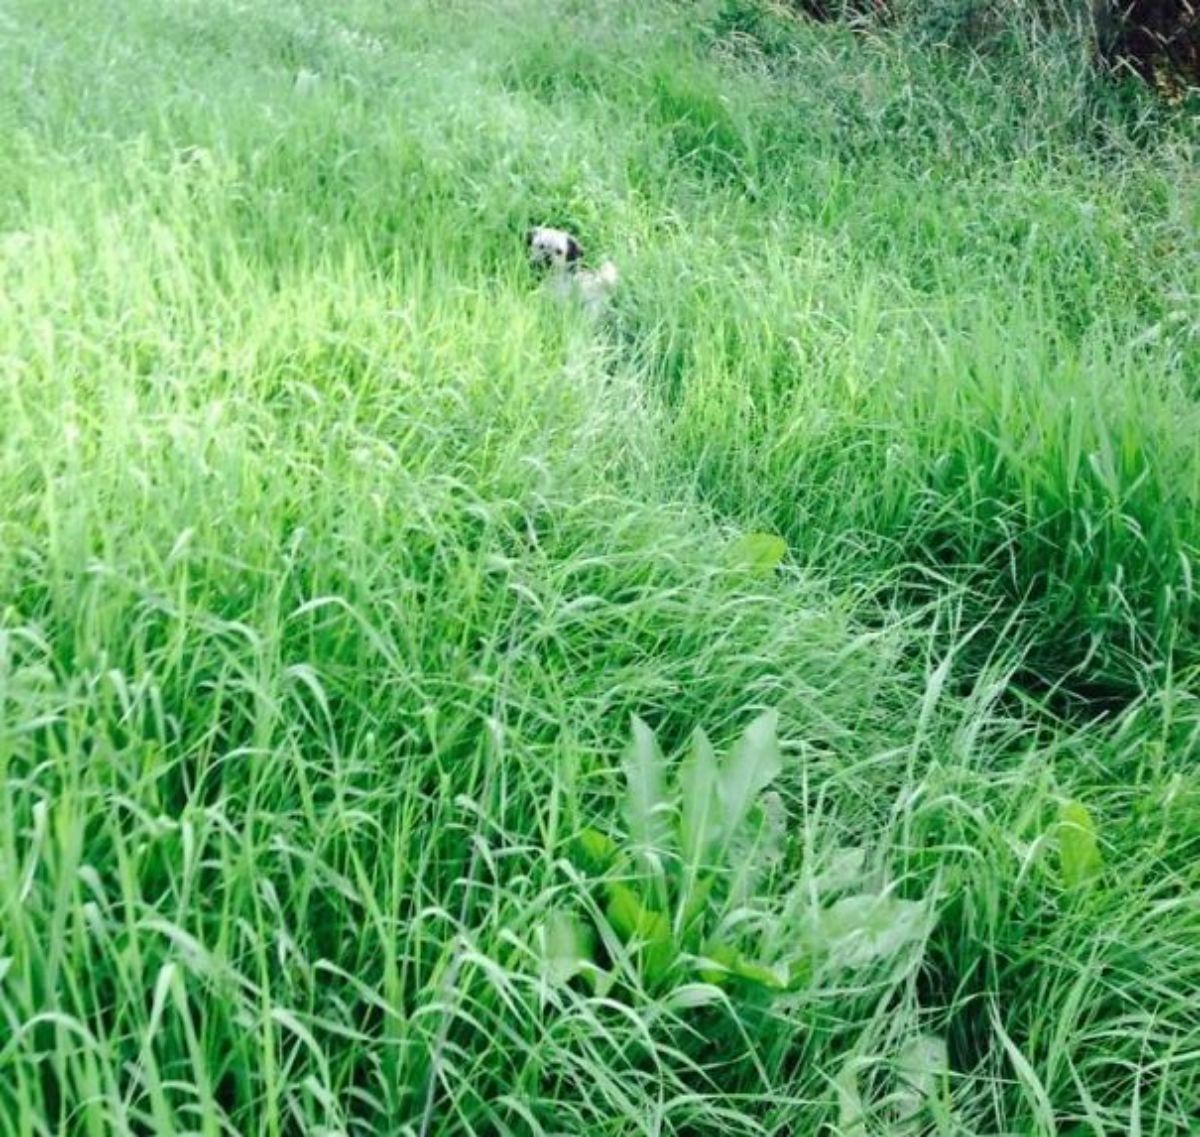 white and black dog standing in tall grass